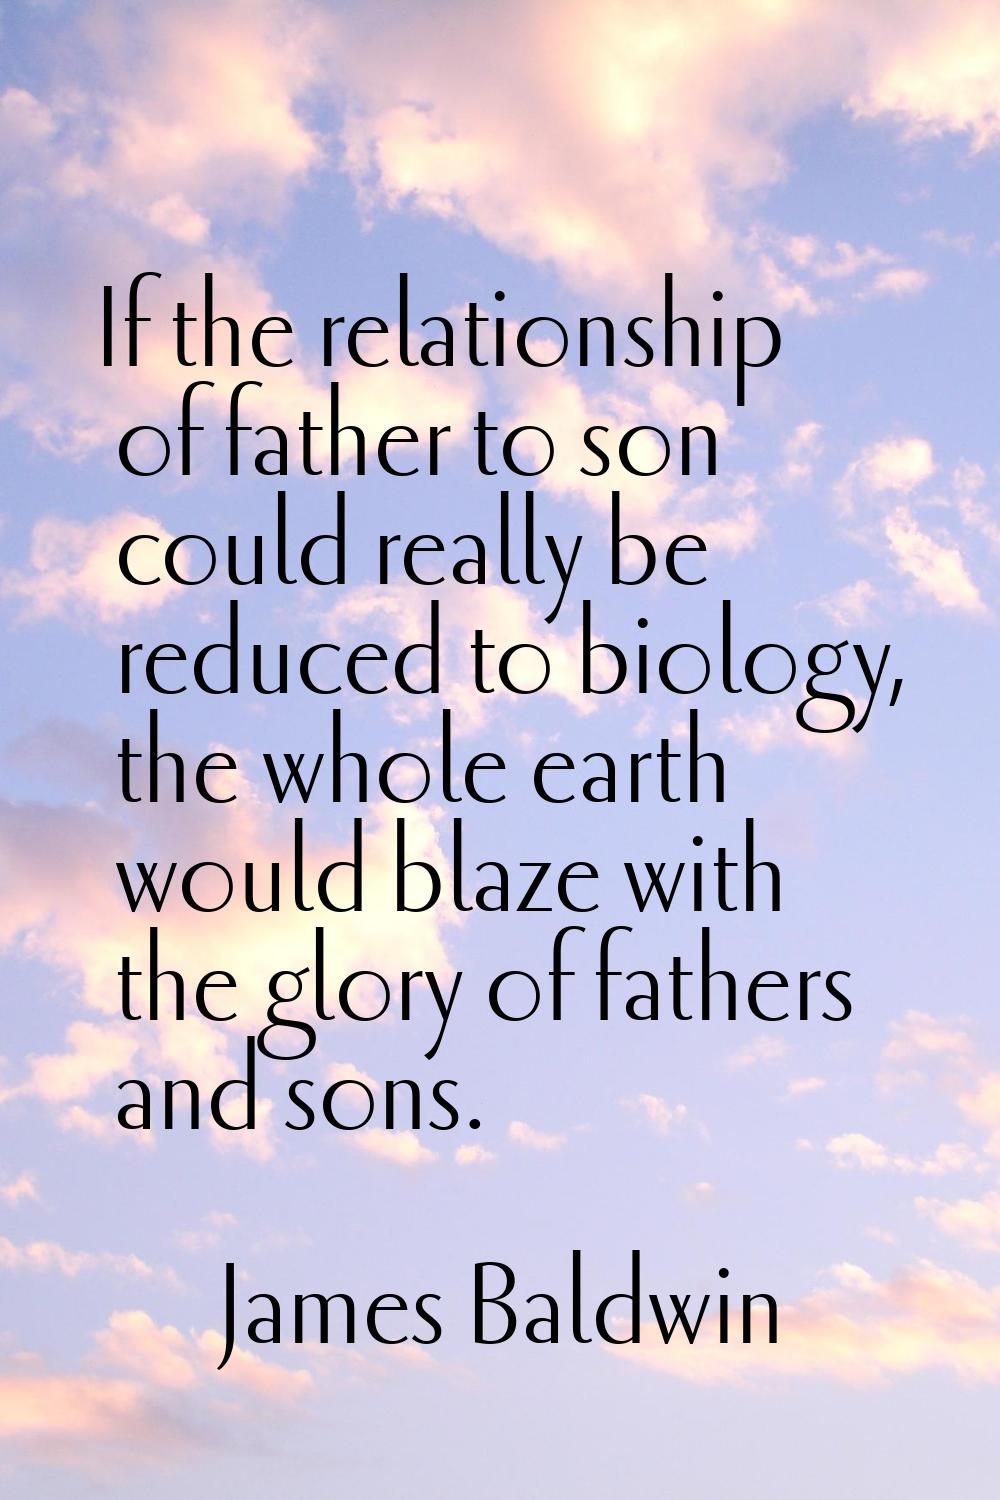 If the relationship of father to son could really be reduced to biology, the whole earth would blaz